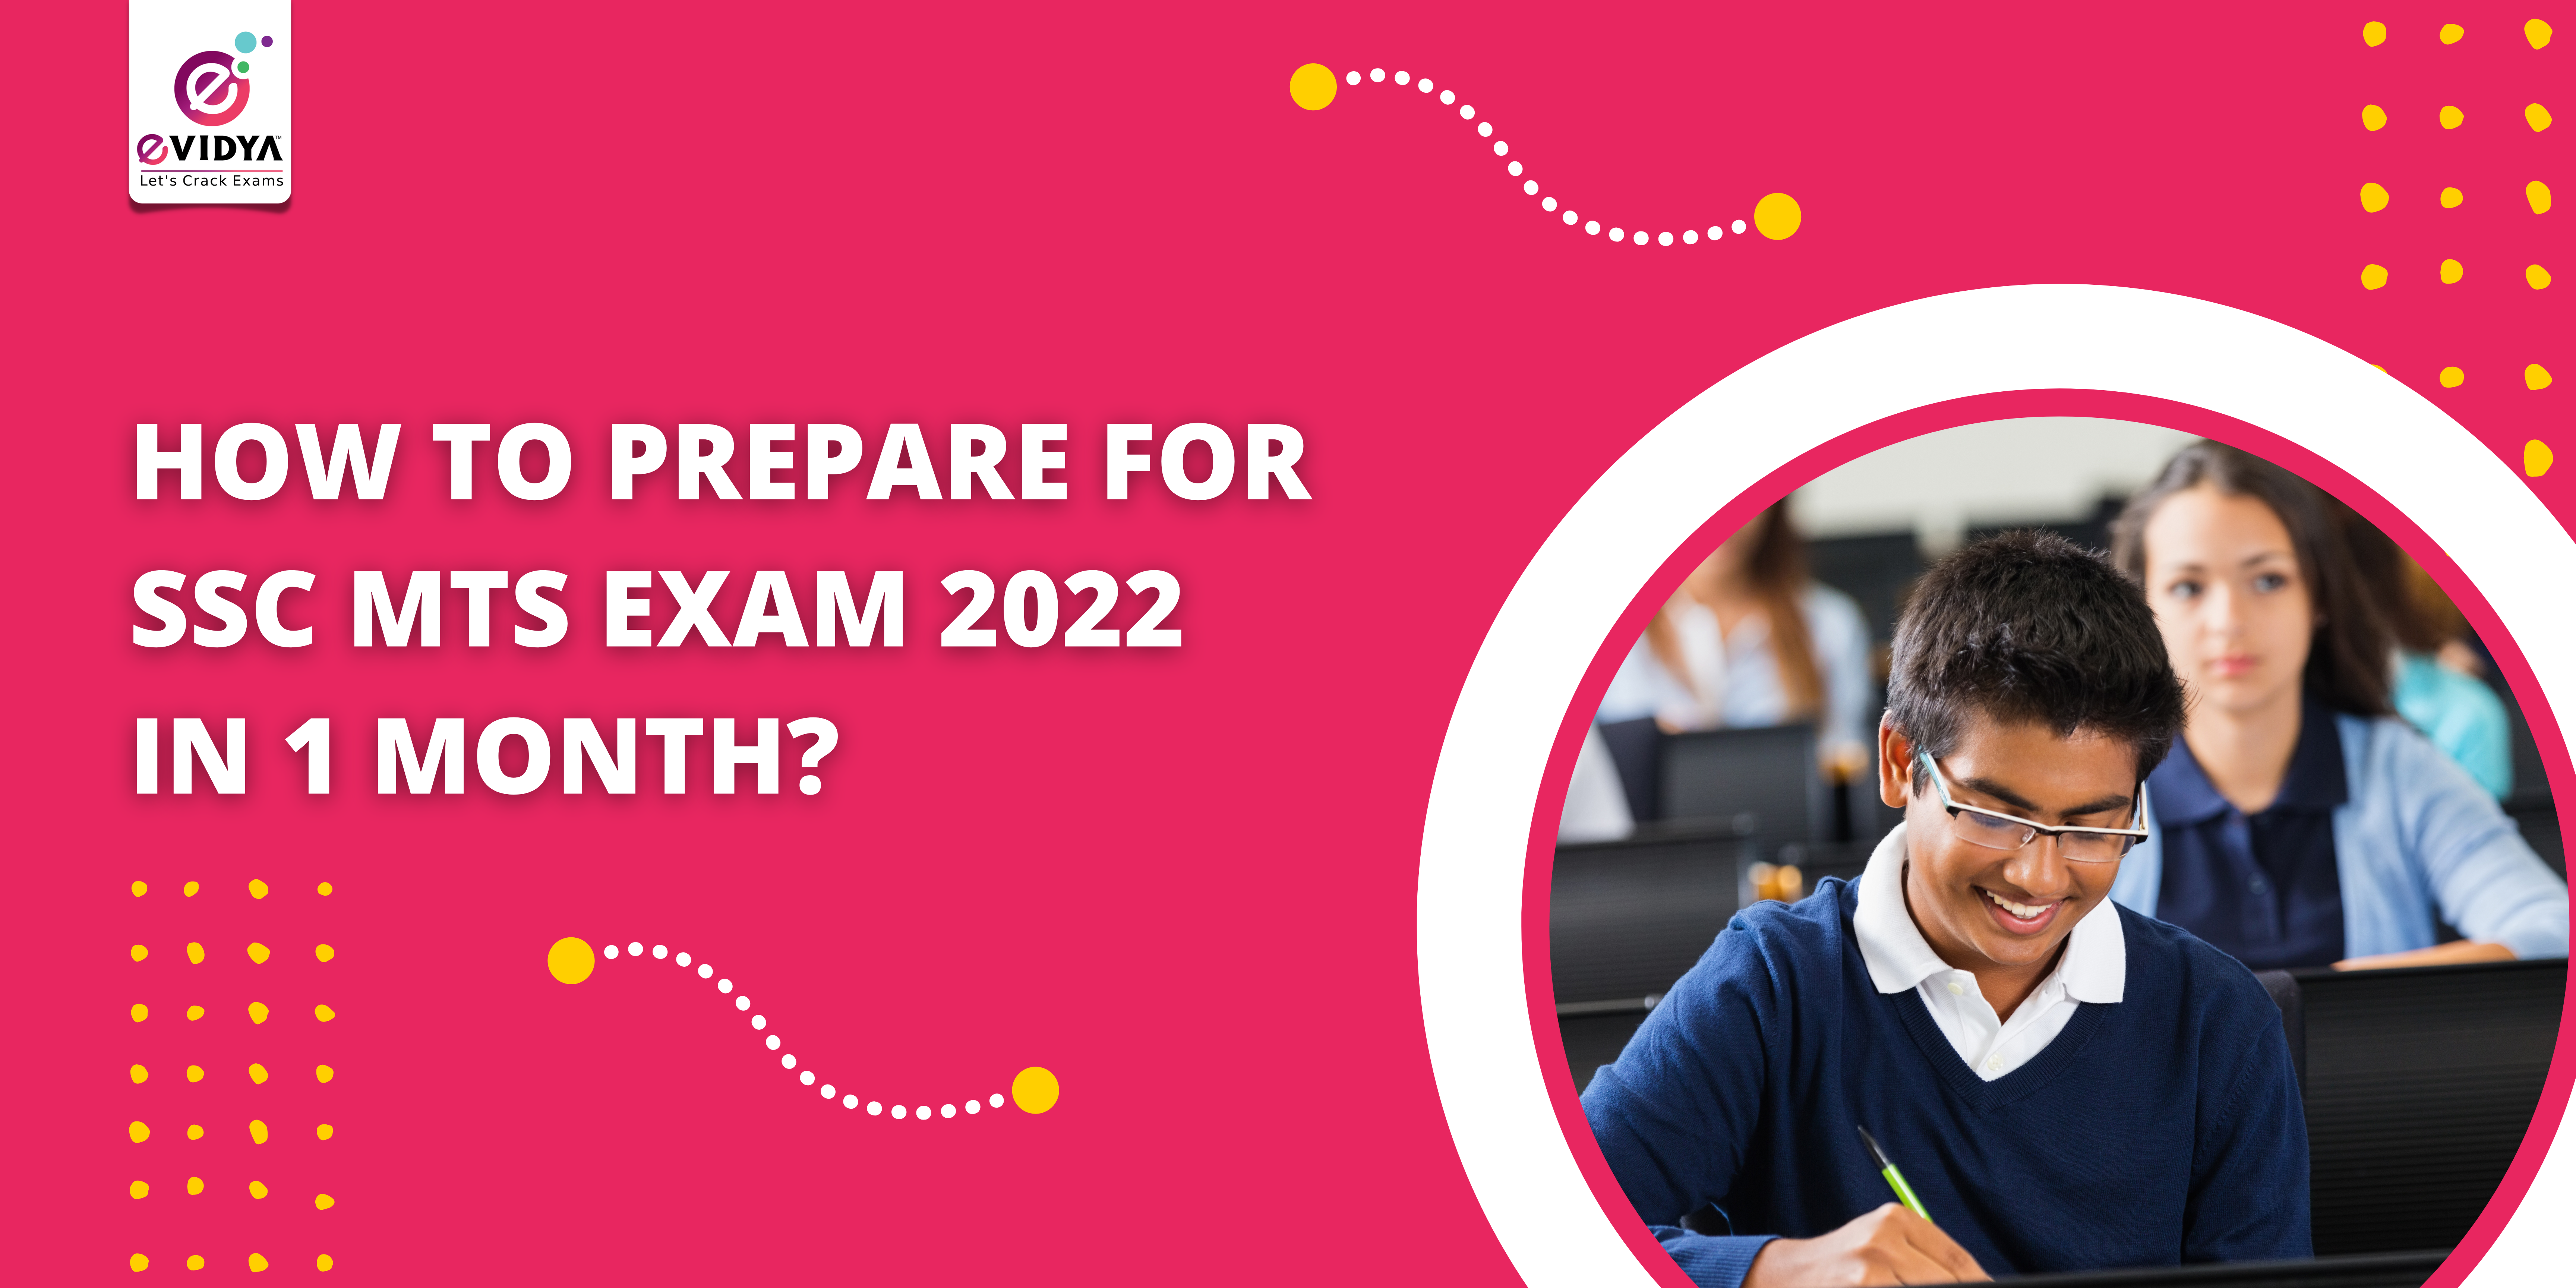 How To Prepare For SSC MTS Exam In 1 Month?